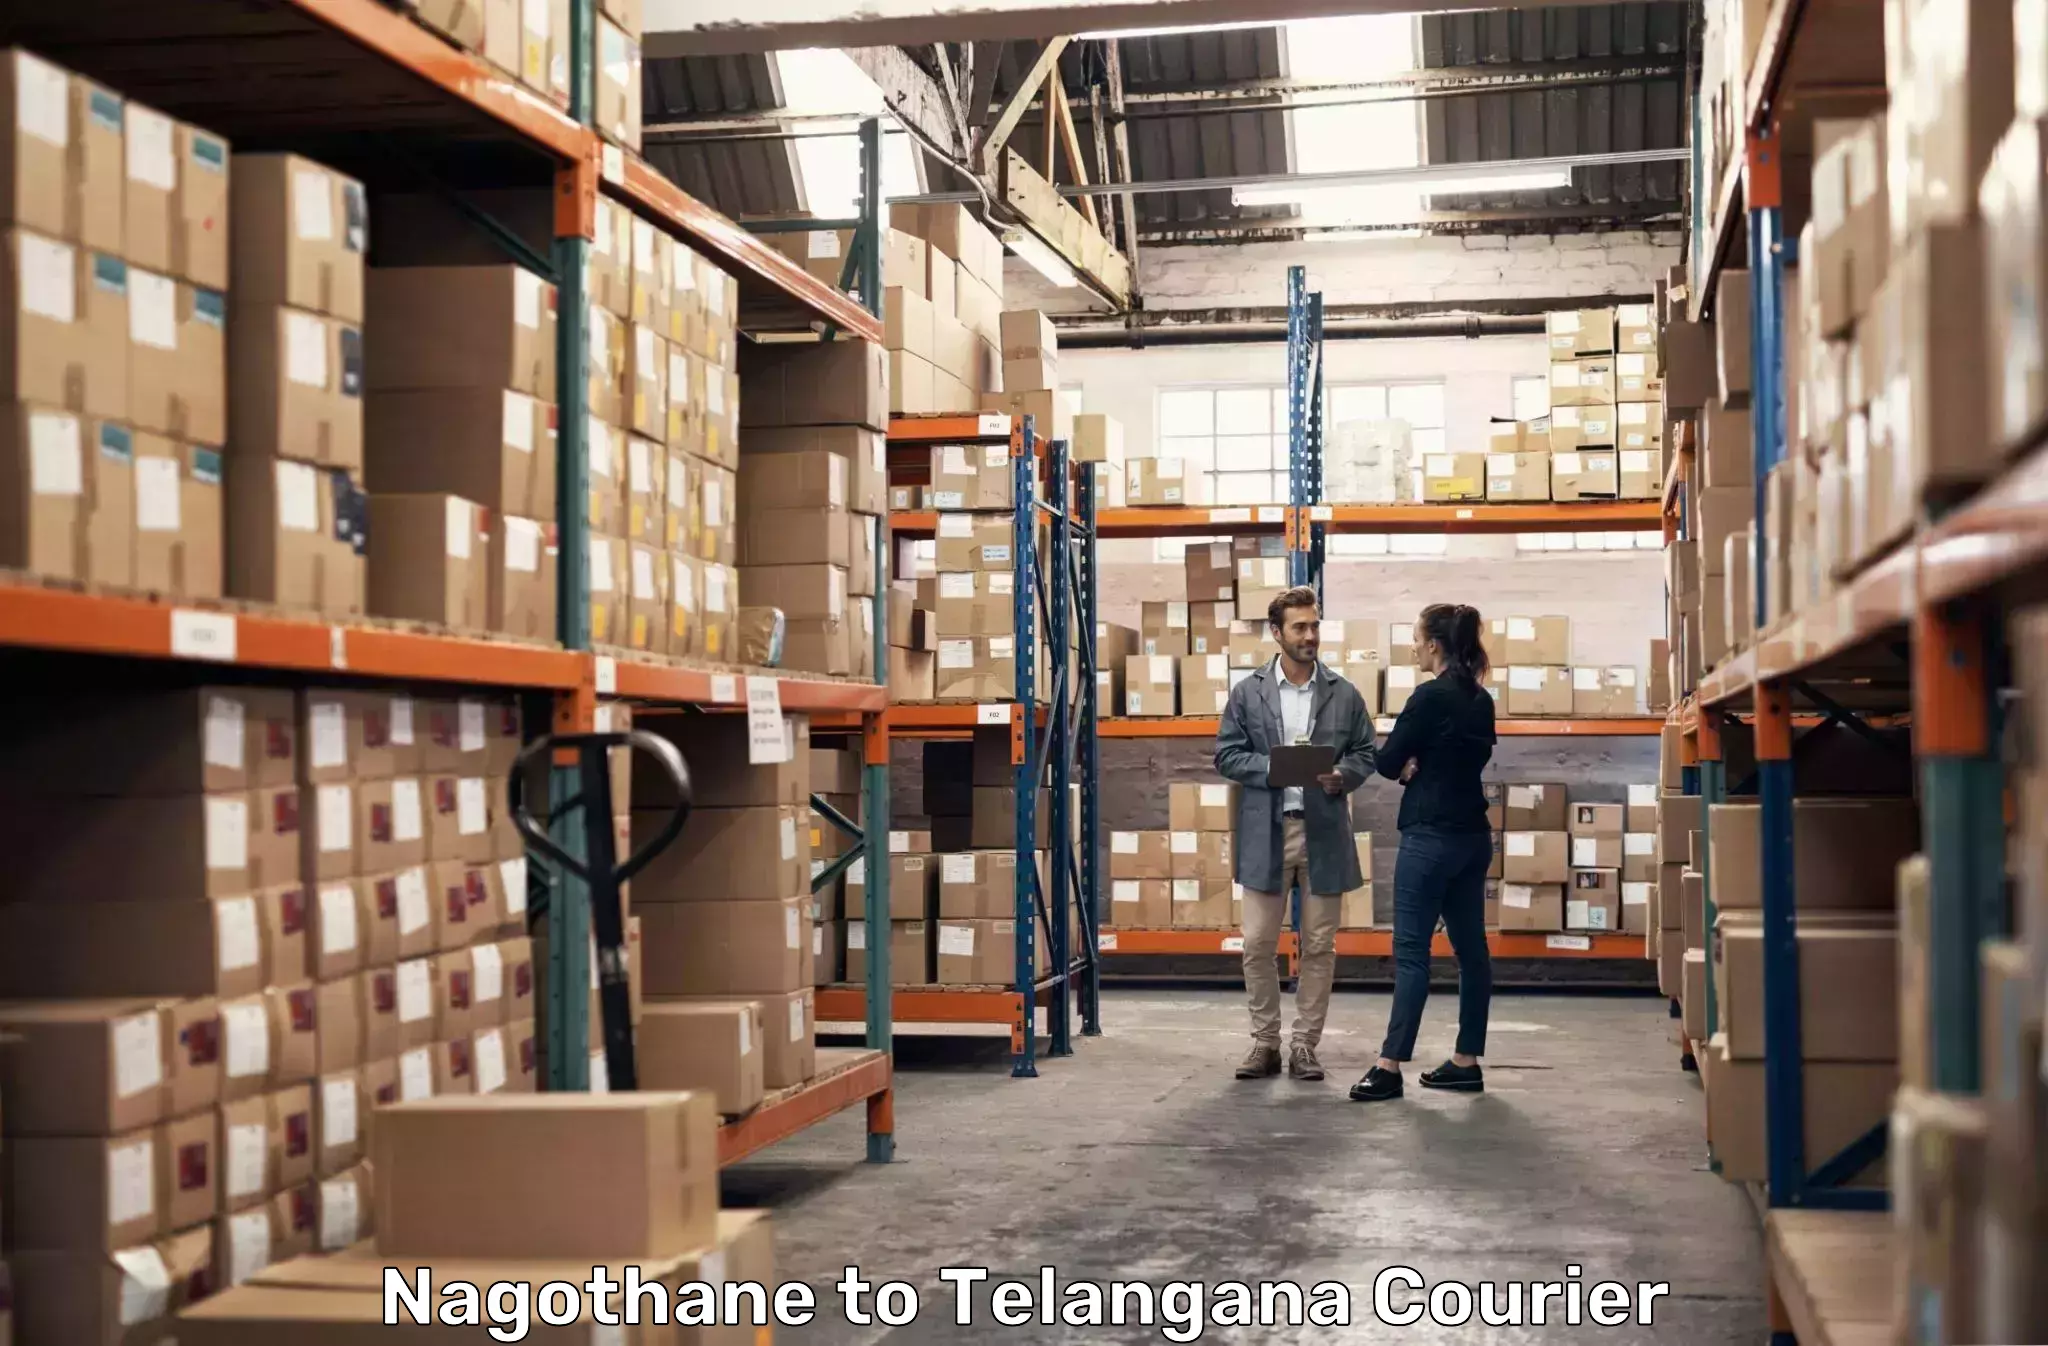 Business delivery service Nagothane to Telangana